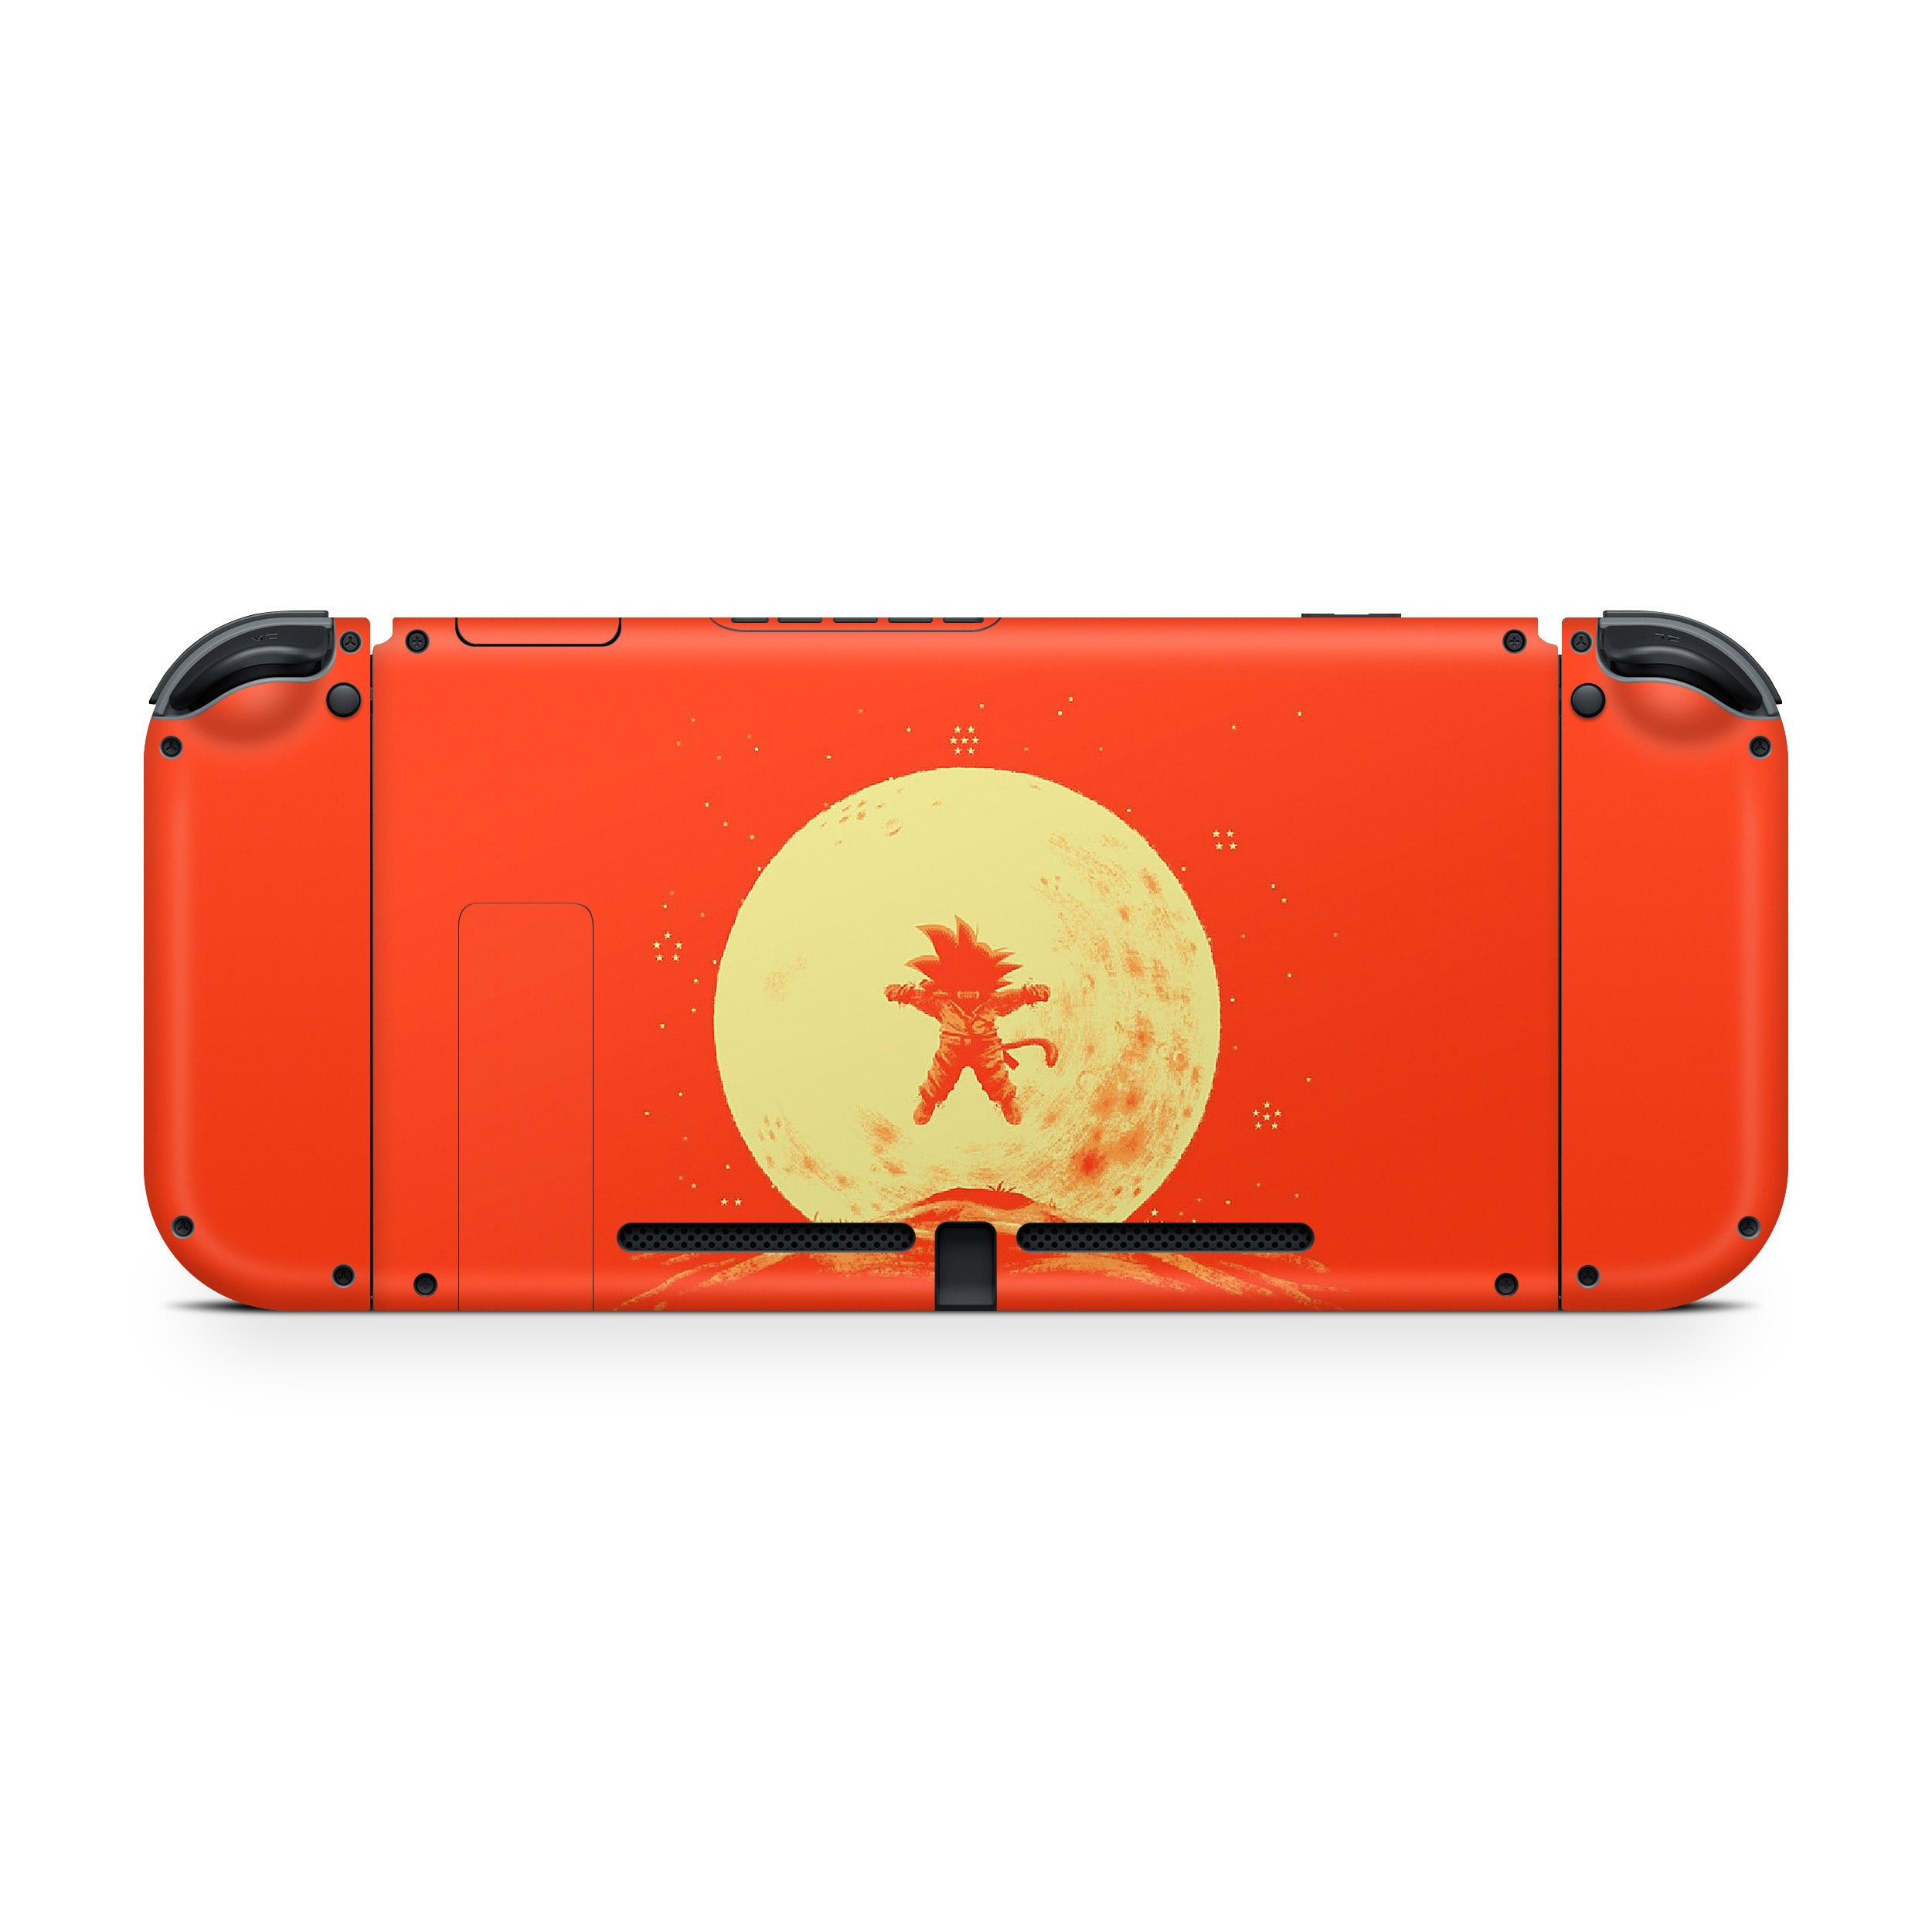 A video game skin featuring a Dragon Ball Z Kid Goku design for the Nintendo Switch.